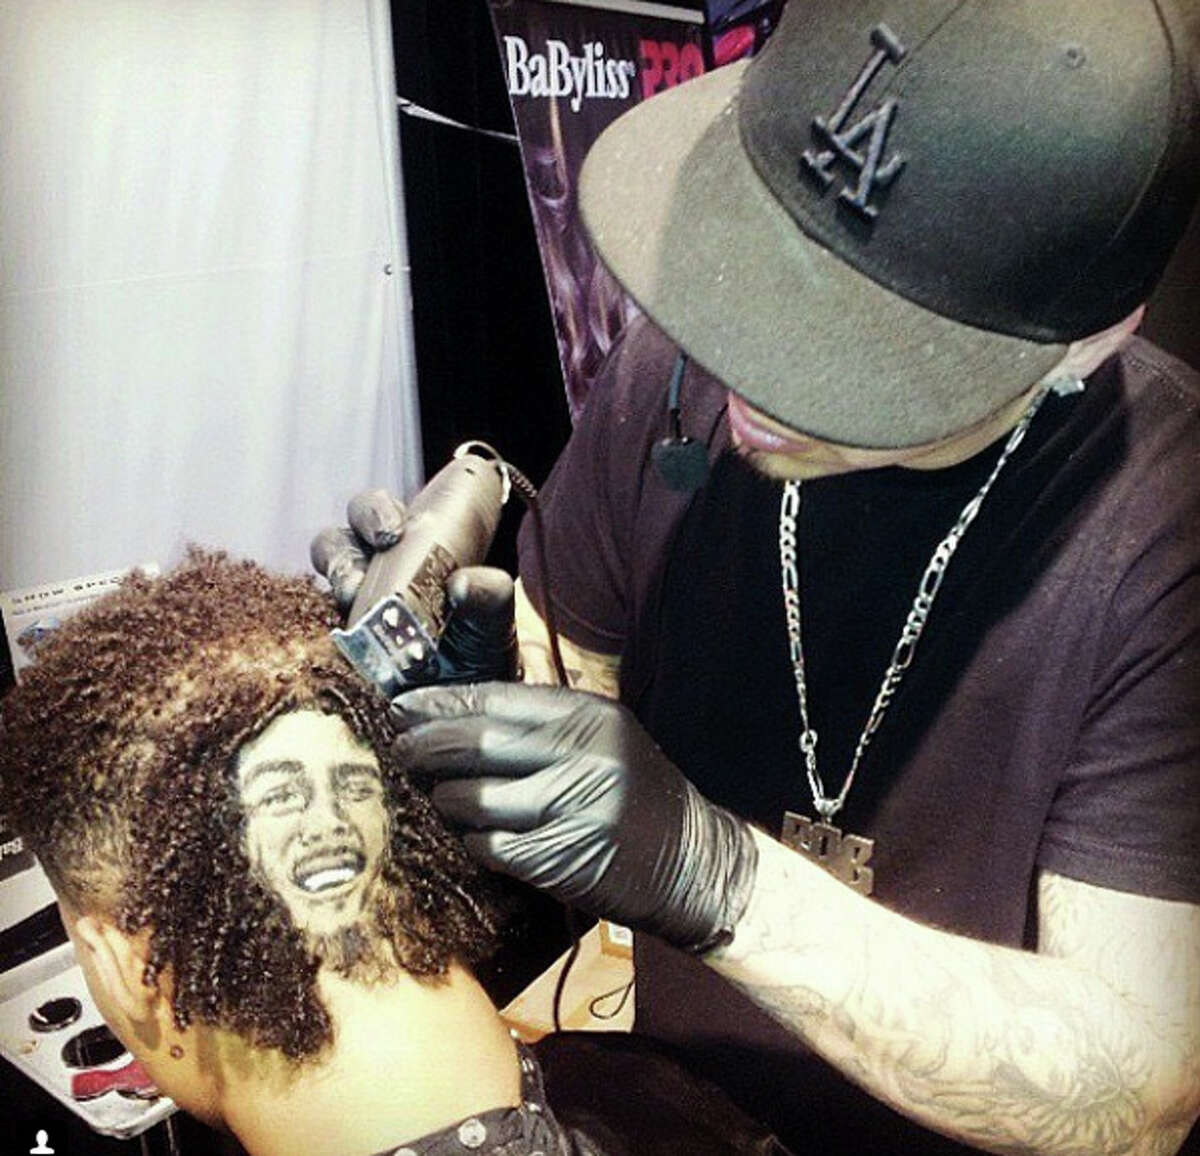 The San Antonio barber known as Rob the Original is famous for his life-like hair cut portraits of celebrities and crazy custom cuts for Spurs fans.